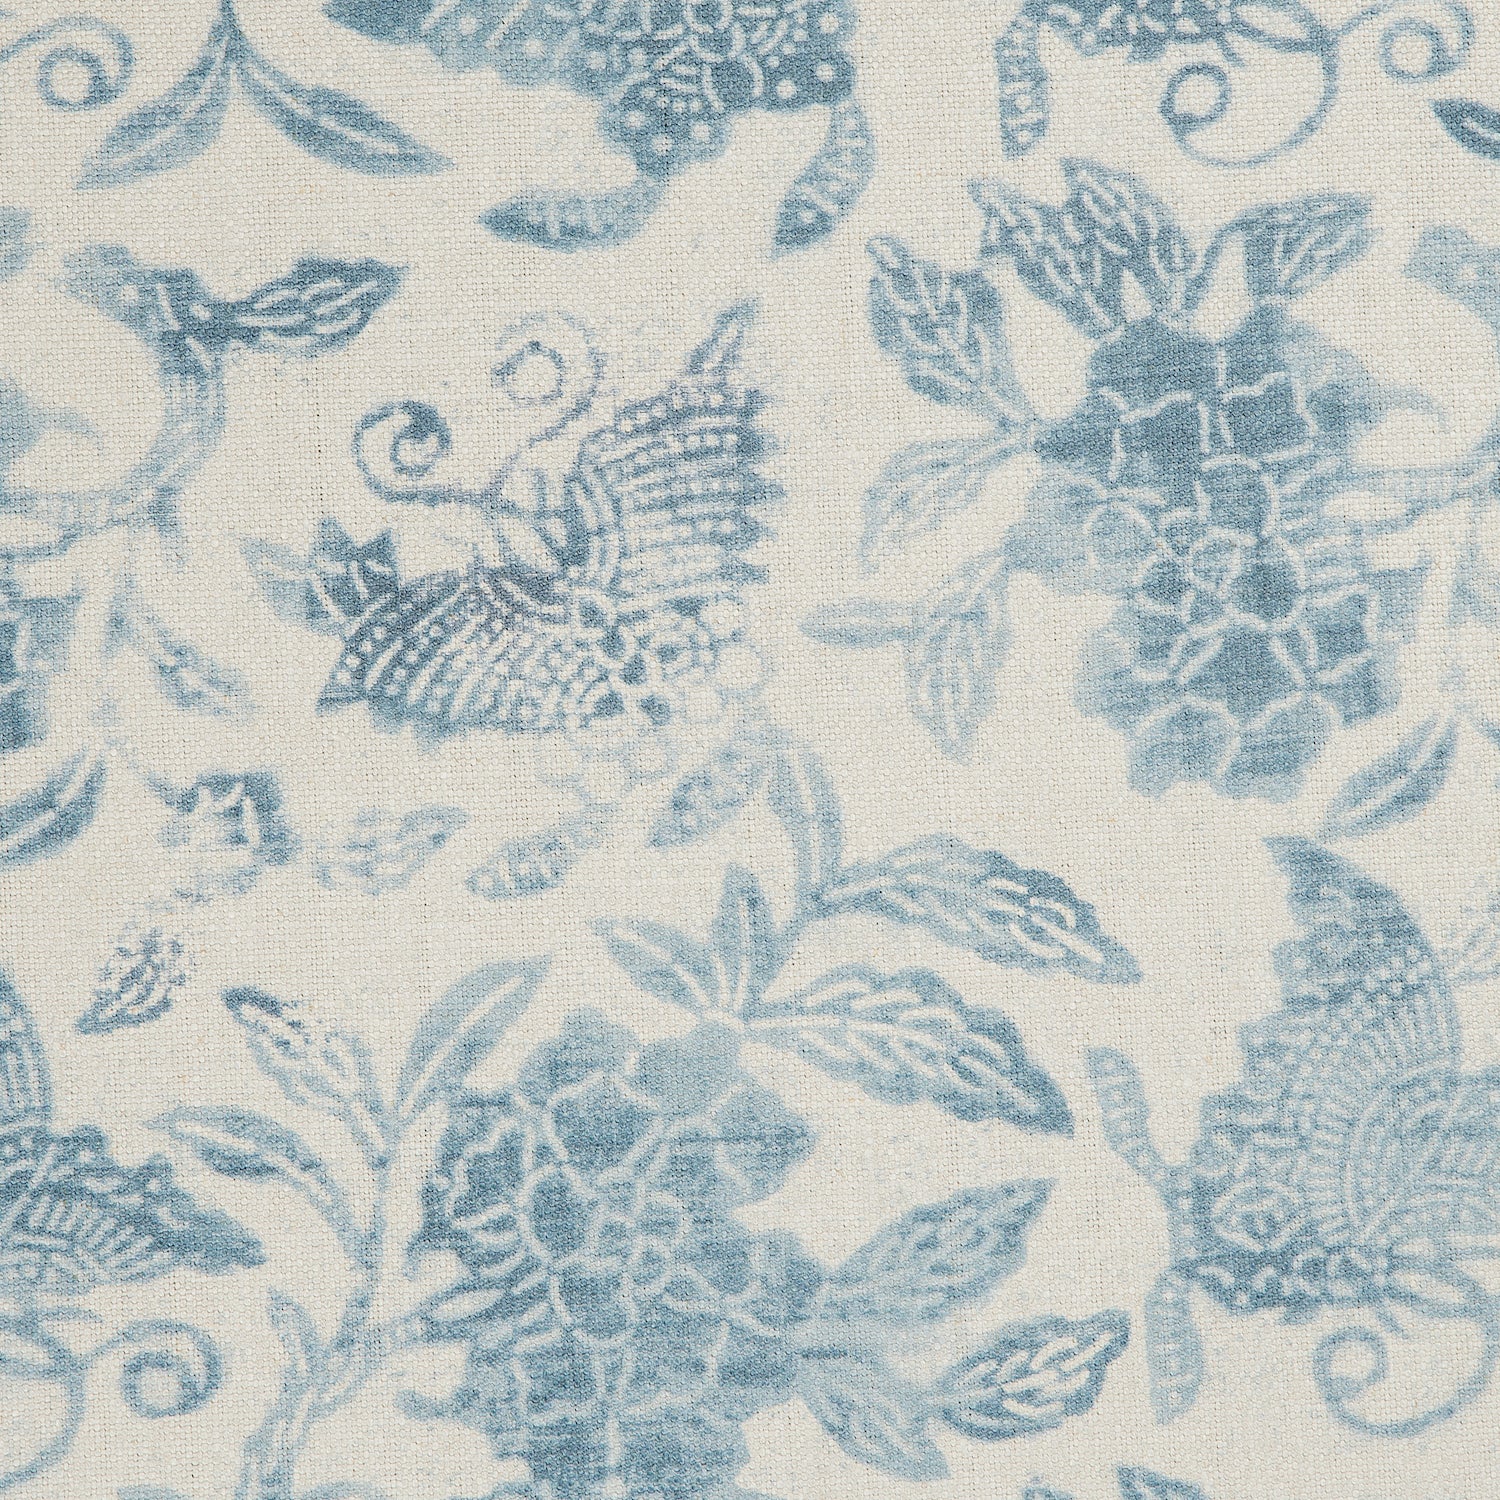 Detail of a printed linen fabric in a repeating flower and butterfly pattern in misty blue on a cream field.